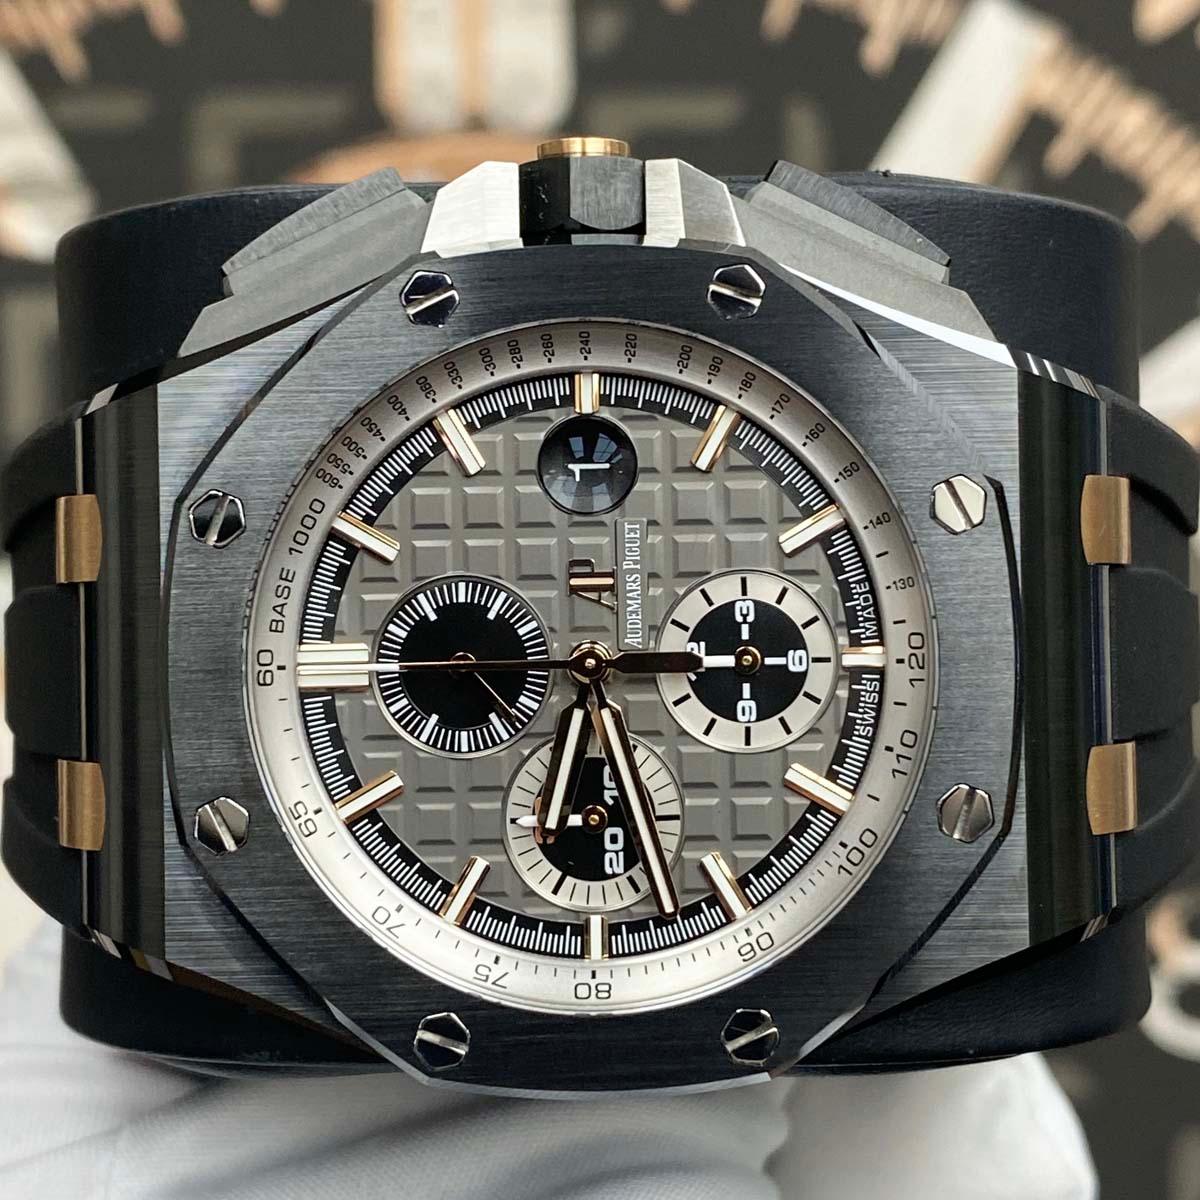 Audemars Piguet Limited Edition Royal Oak Offshore Pride Of Germany 44mm 26415CE.OO.A002CA.01 Grey Dial - Gotham Trading 